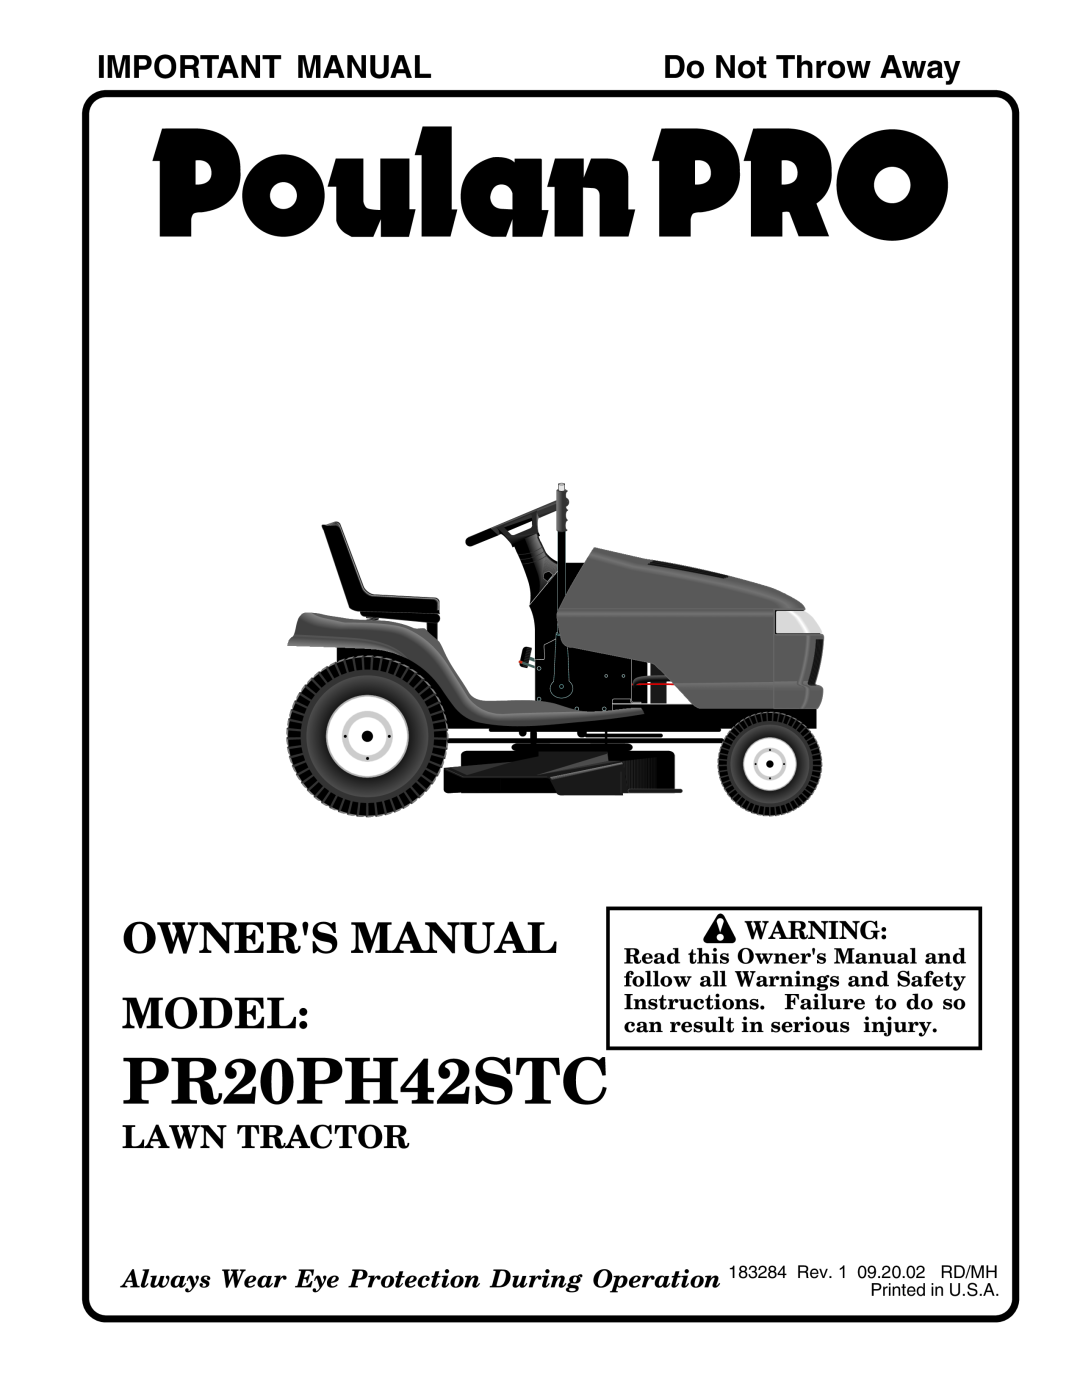 Poulan PR20PH42STC owner manual Important Manual, Do Not Throw Away, Lawn Tractor 